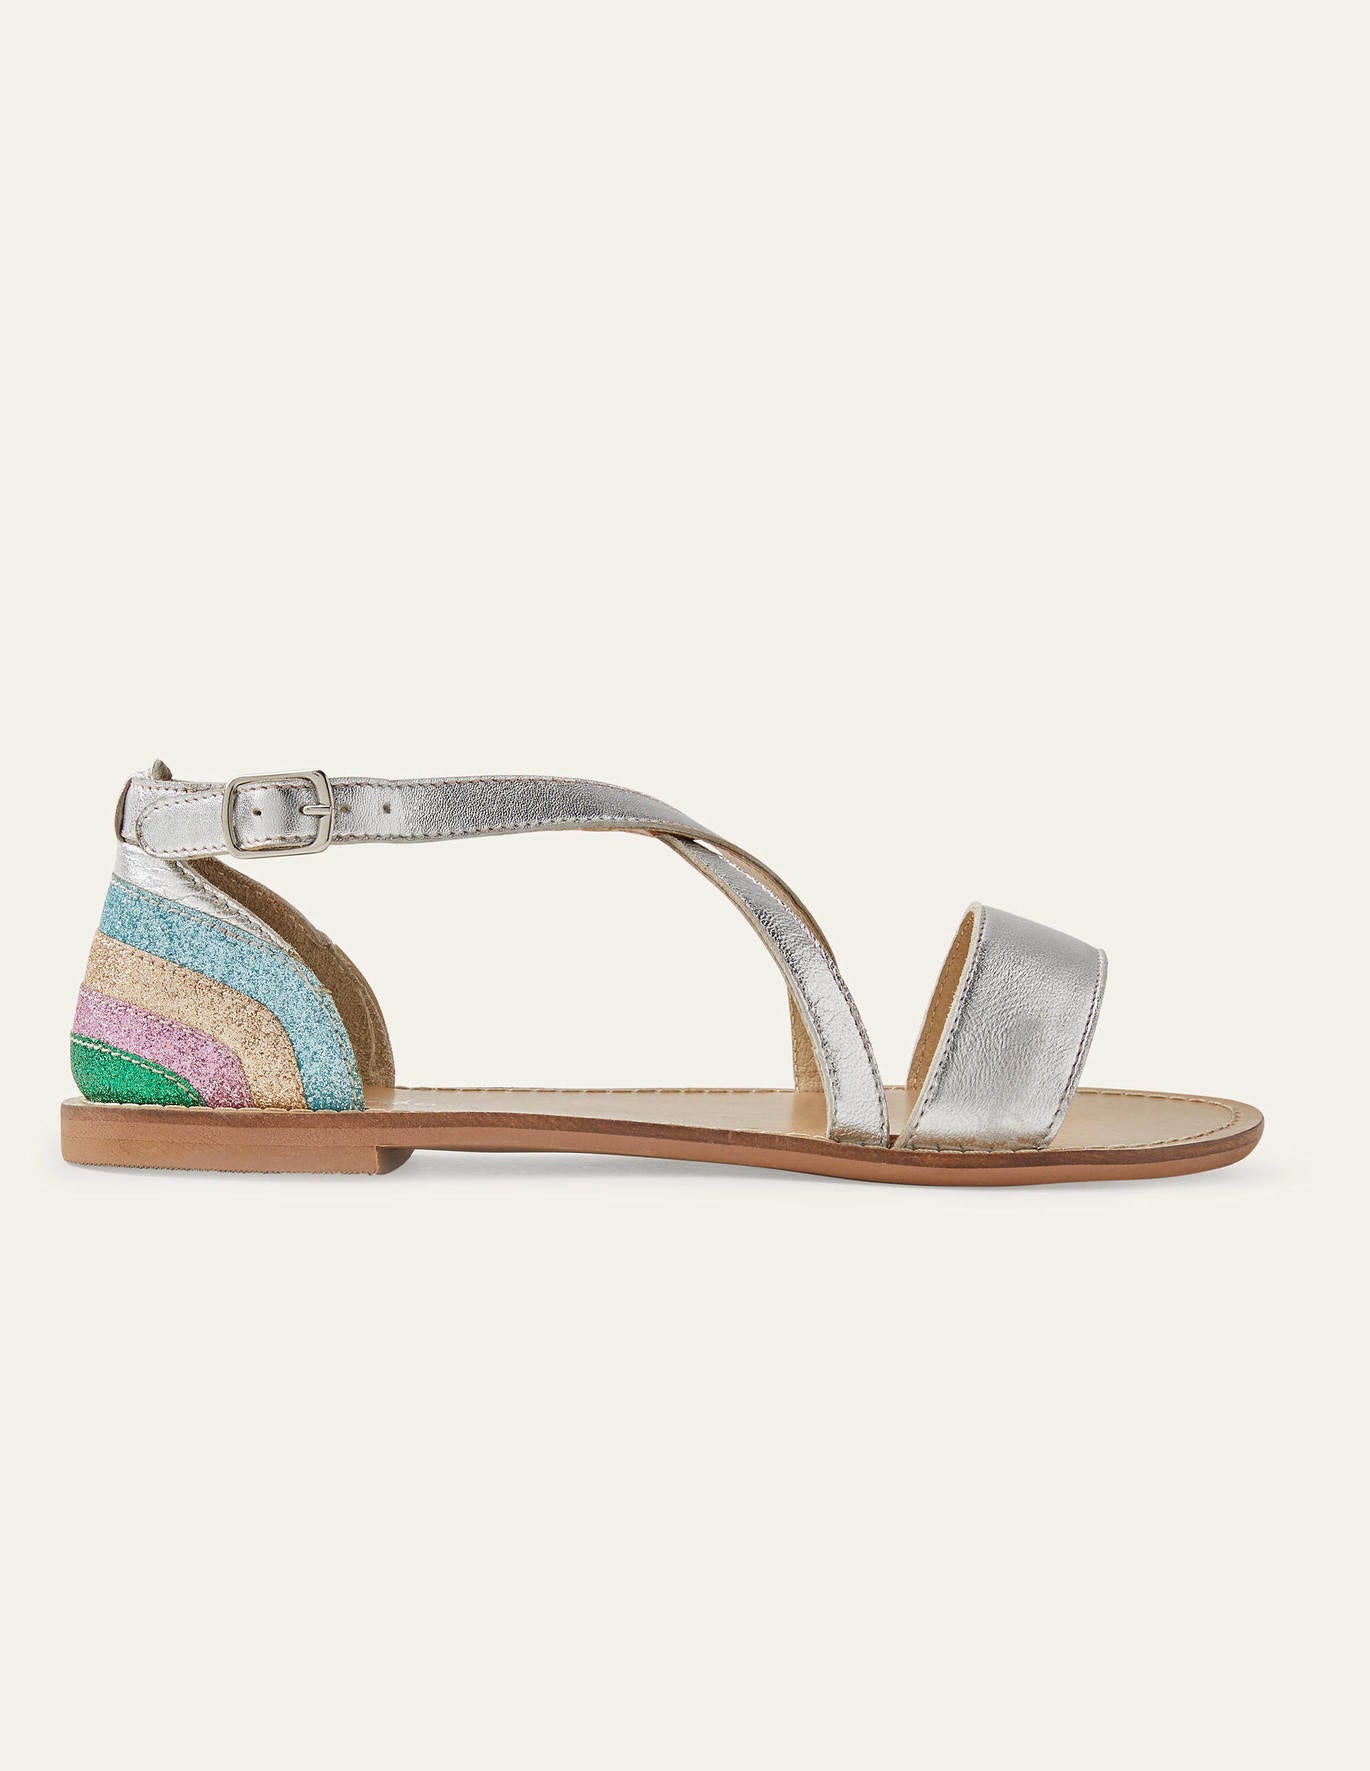 Boden Leather Crossover Sandals - Silver Metallic